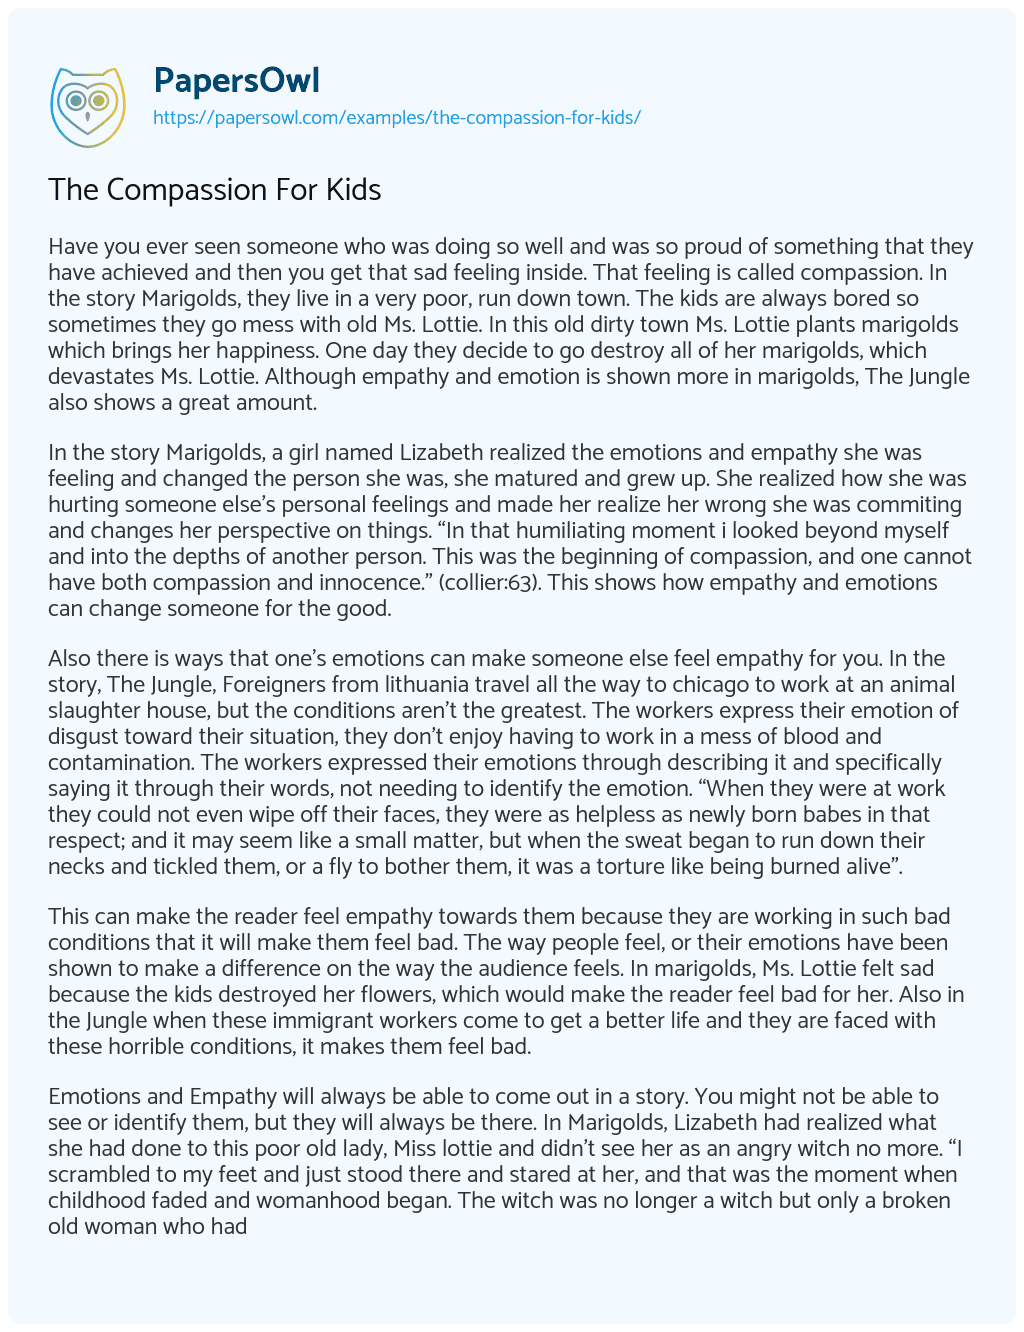 Essay on The Compassion for Kids